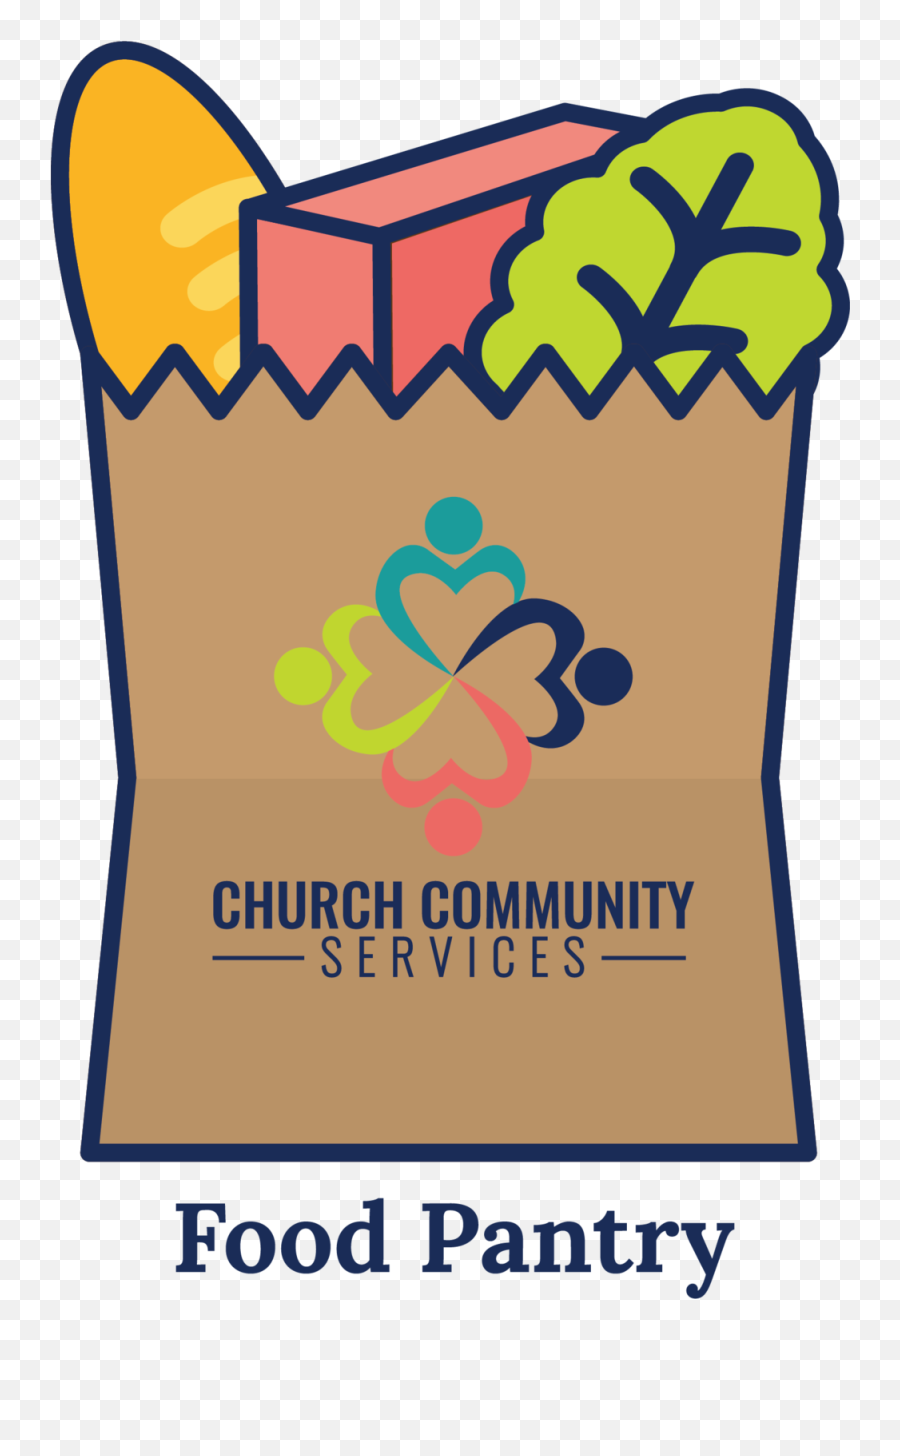 Food Pantry U2014 Church Community Services - Church Food Pantry Names Png,Groceries Png